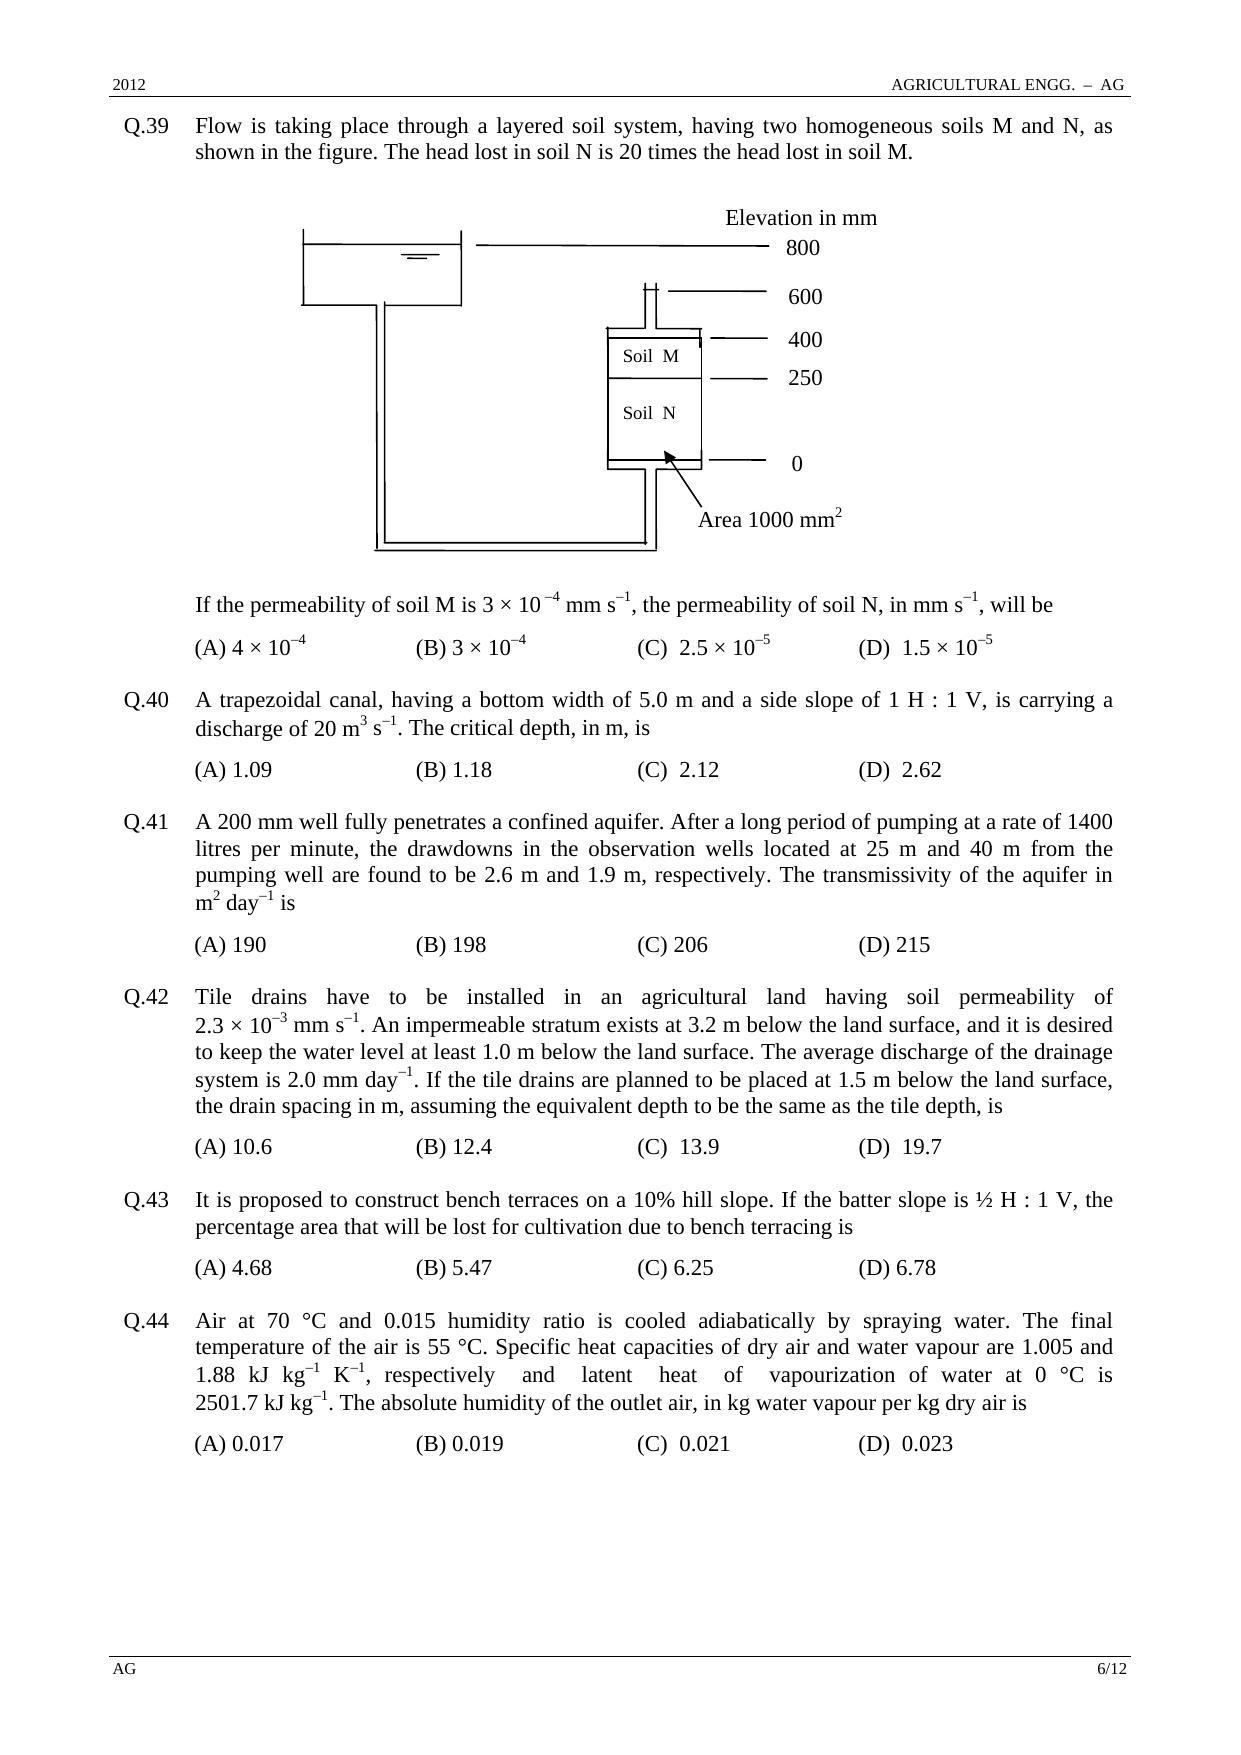 GATE 2012 Agricultural Engineering (AG) Question Paper with Answer Key - Page 6